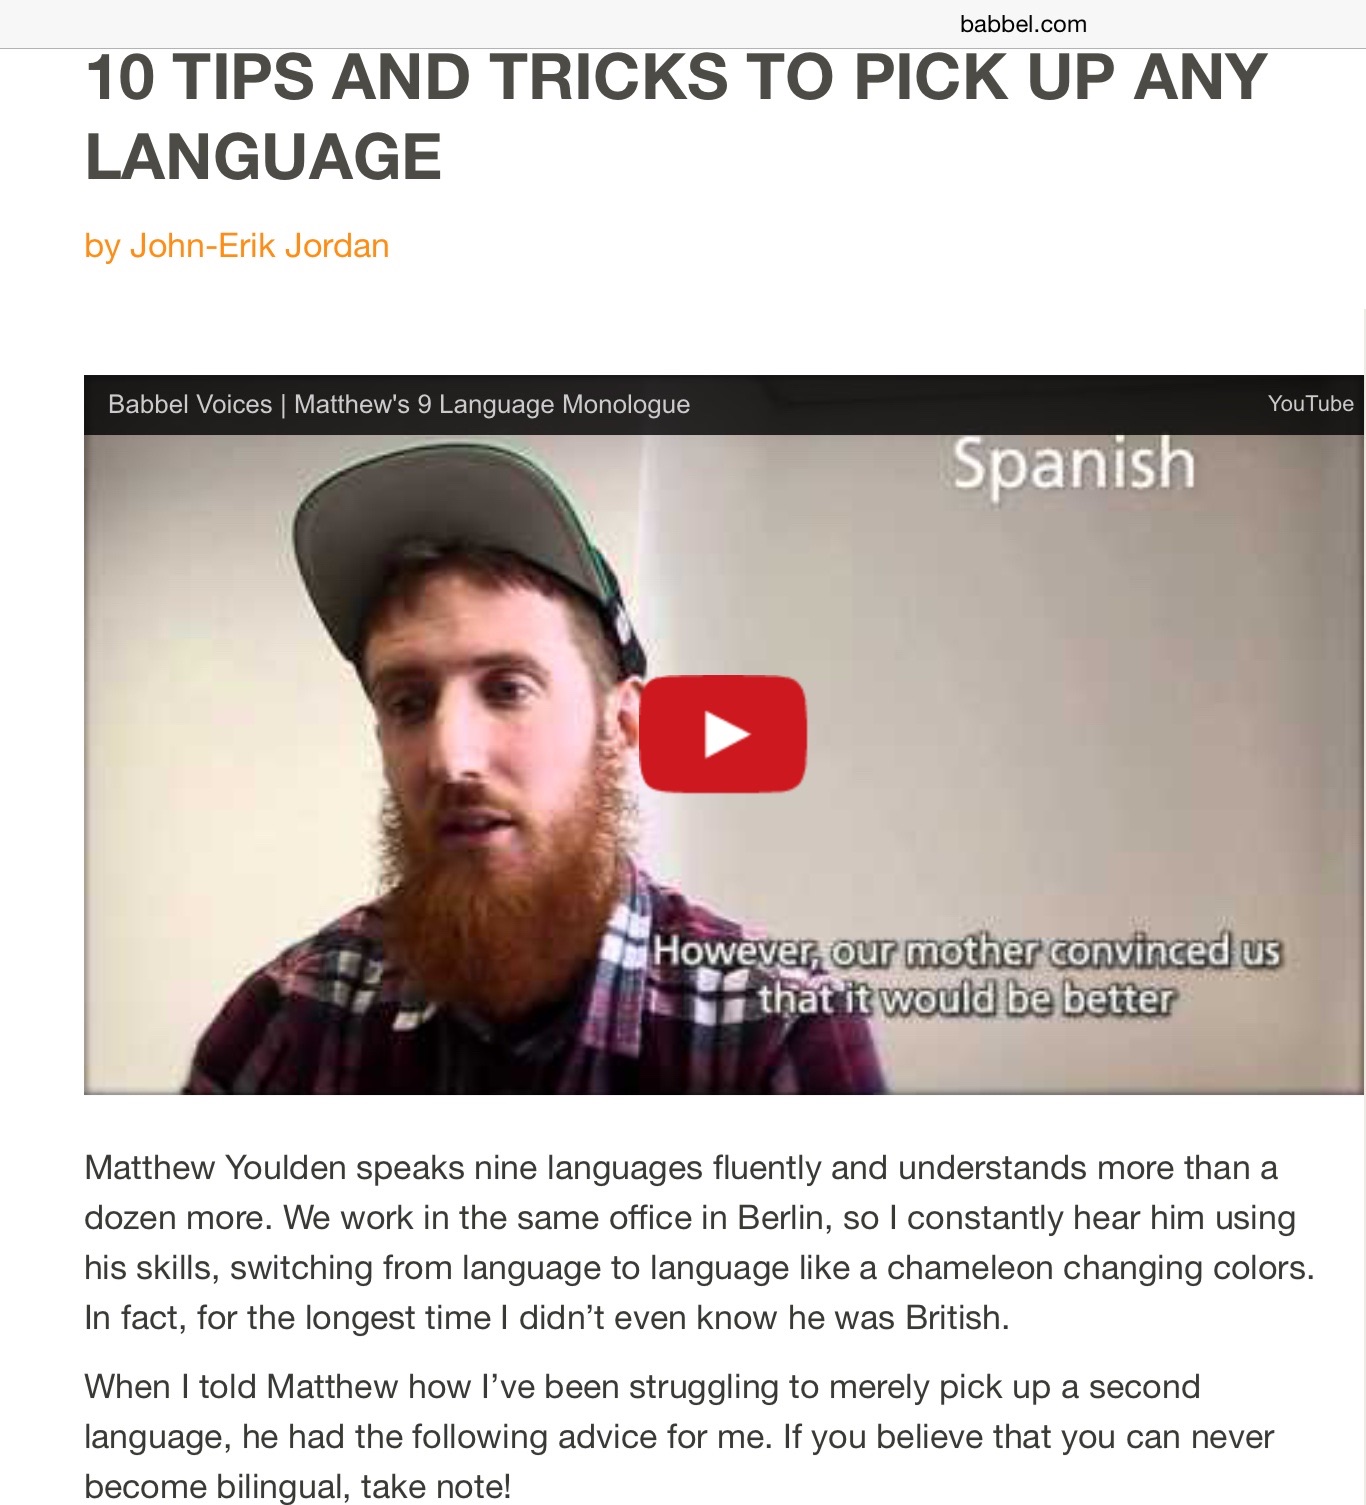 10 tips and tricks to pick up any language